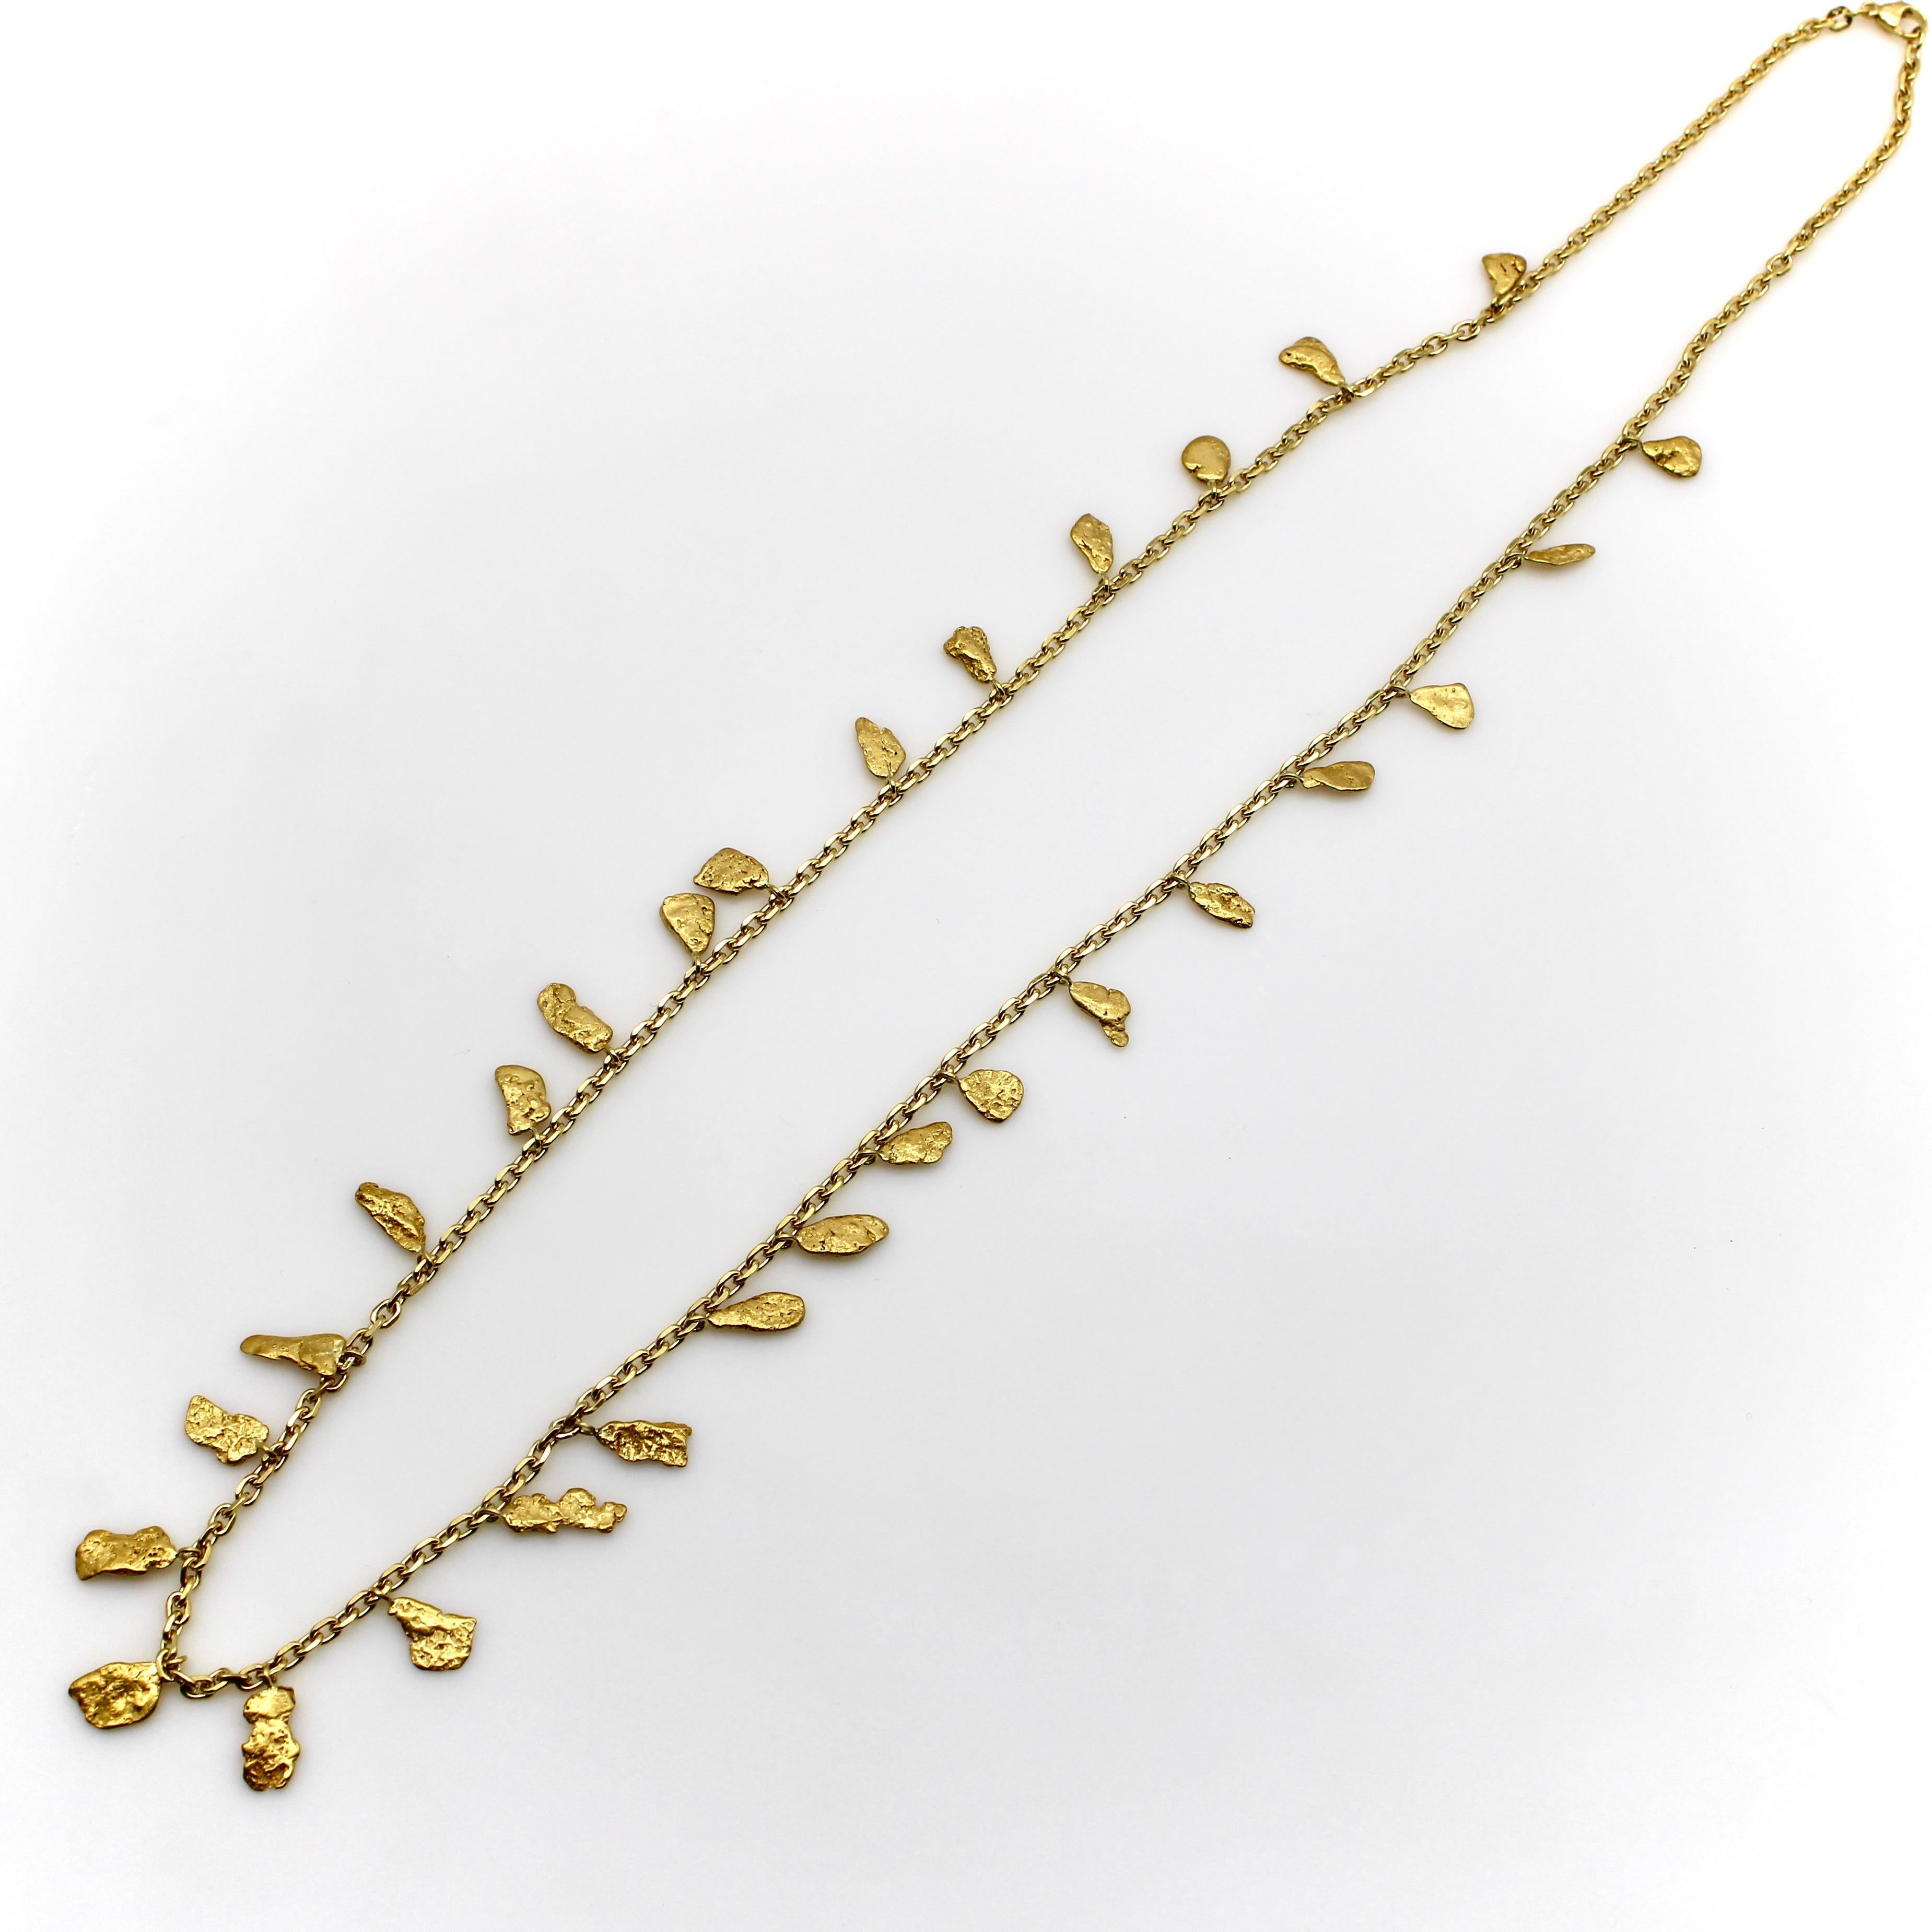 22 - 24K Gold Nugget Fringe Necklace on 18K Gold Italian Chain  In Good Condition For Sale In Venice, CA